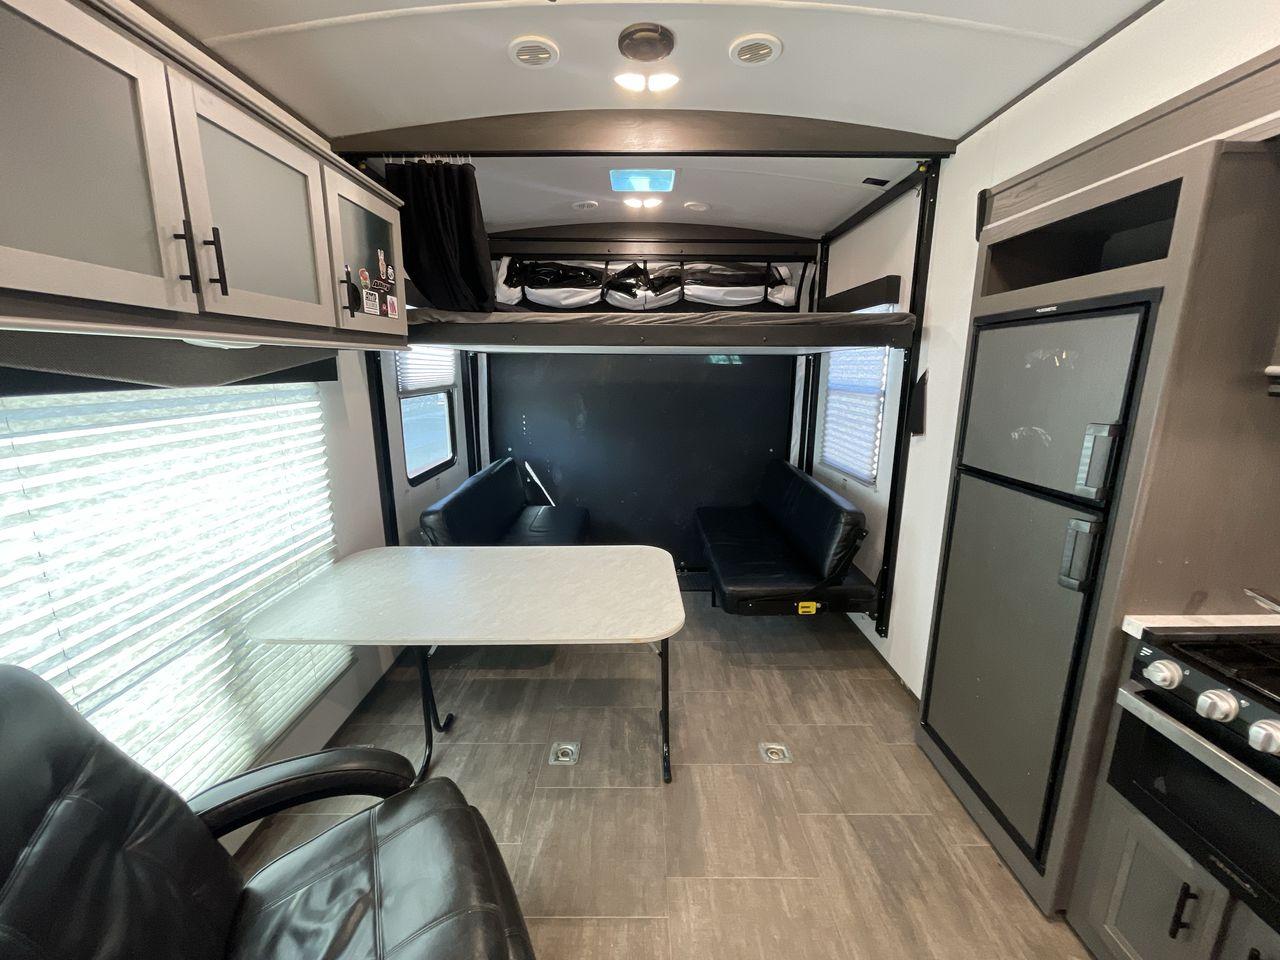 2021 CRUISER RV STRYKER 3414 (5RXGB392XM1) , Length: 38.75 ft. | Dry Weight: 9,608 lbs. | Gross Weight: 12,800 lbs. | Slides: 2 transmission, located at 4319 N Main St, Cleburne, TX, 76033, (817) 678-5133, 32.385960, -97.391212 - The 2021 Cruiser RV Stryker 3414 is a meticulously crafted toy hauler that seamlessly integrates luxury, versatility, and durability to provide an exceptional on-the-road experience. Whether you're a passionate thrill-seeker indulging in outdoor sports or a discerning family seeking comfort, the Str - Photo #12